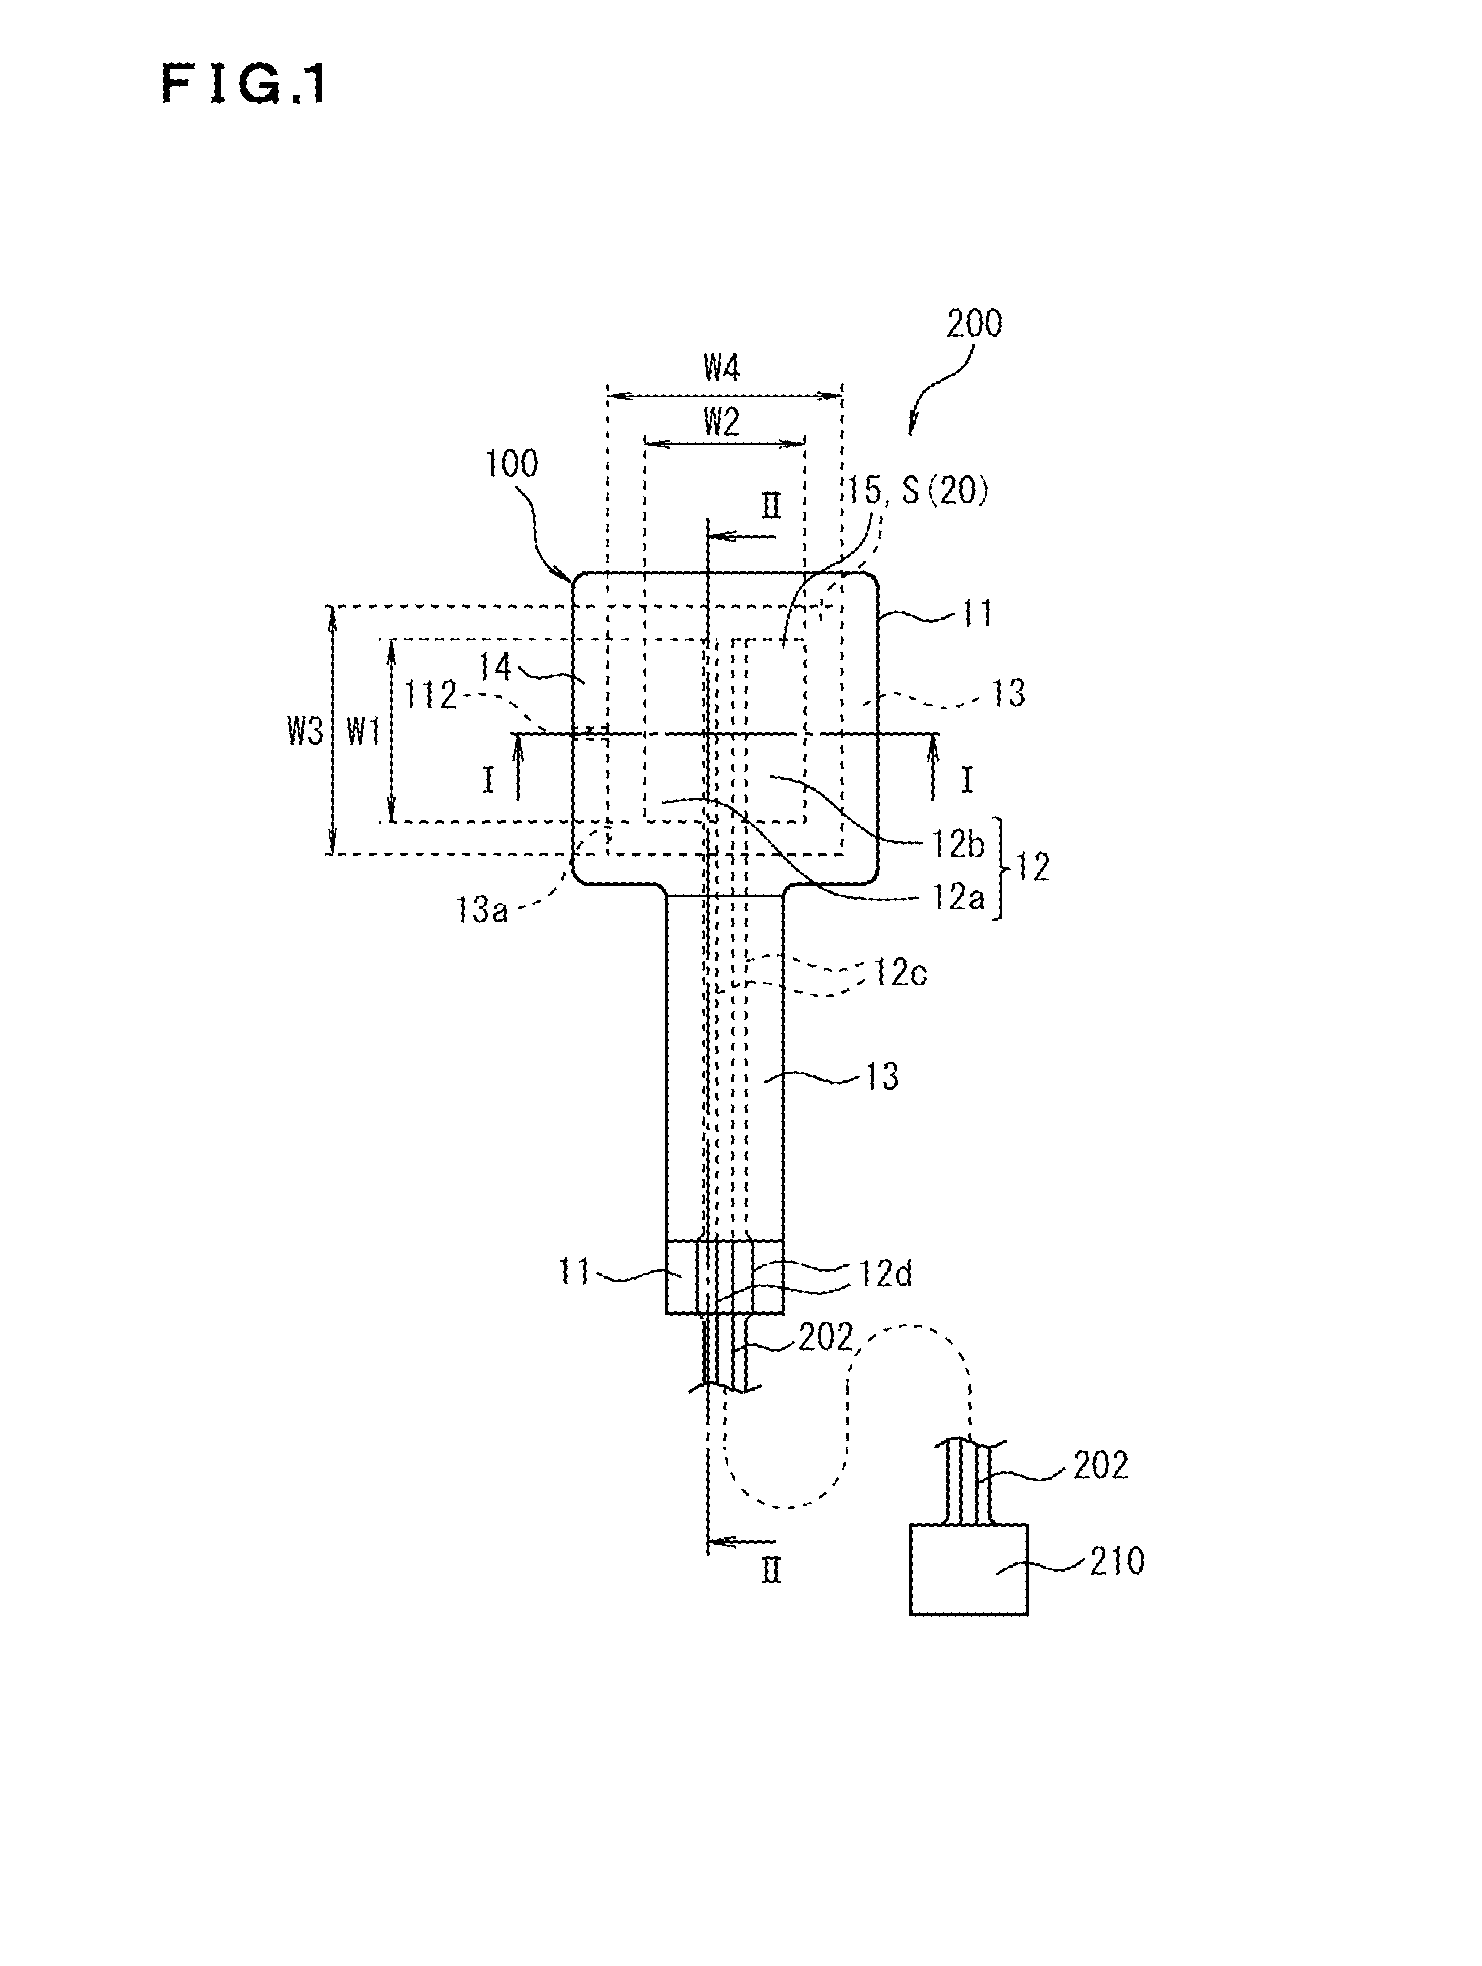 Pressure sensing element having an insulating layer with an increased height from the substrate towards the opening